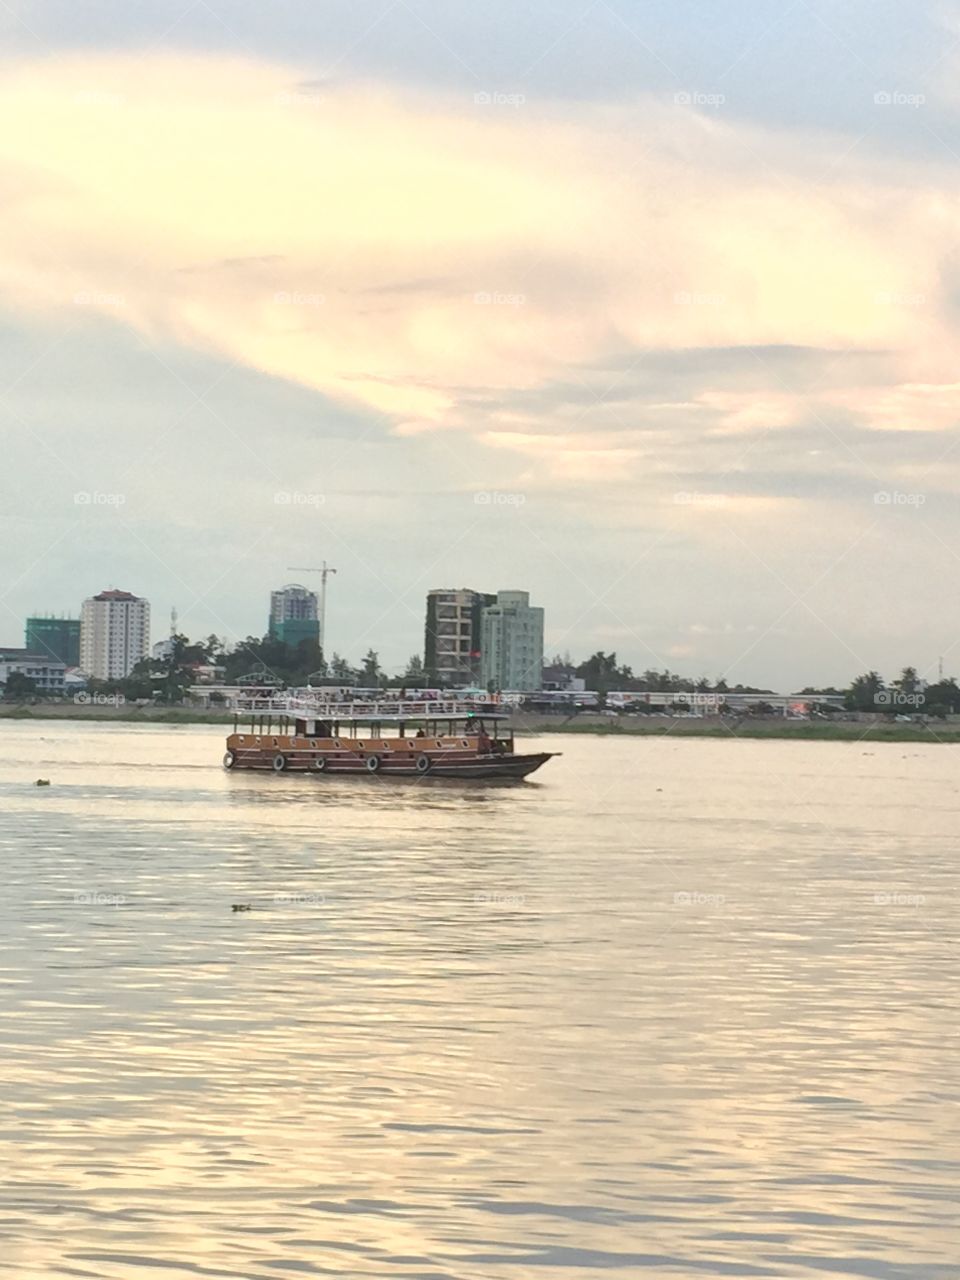 Ship on the river